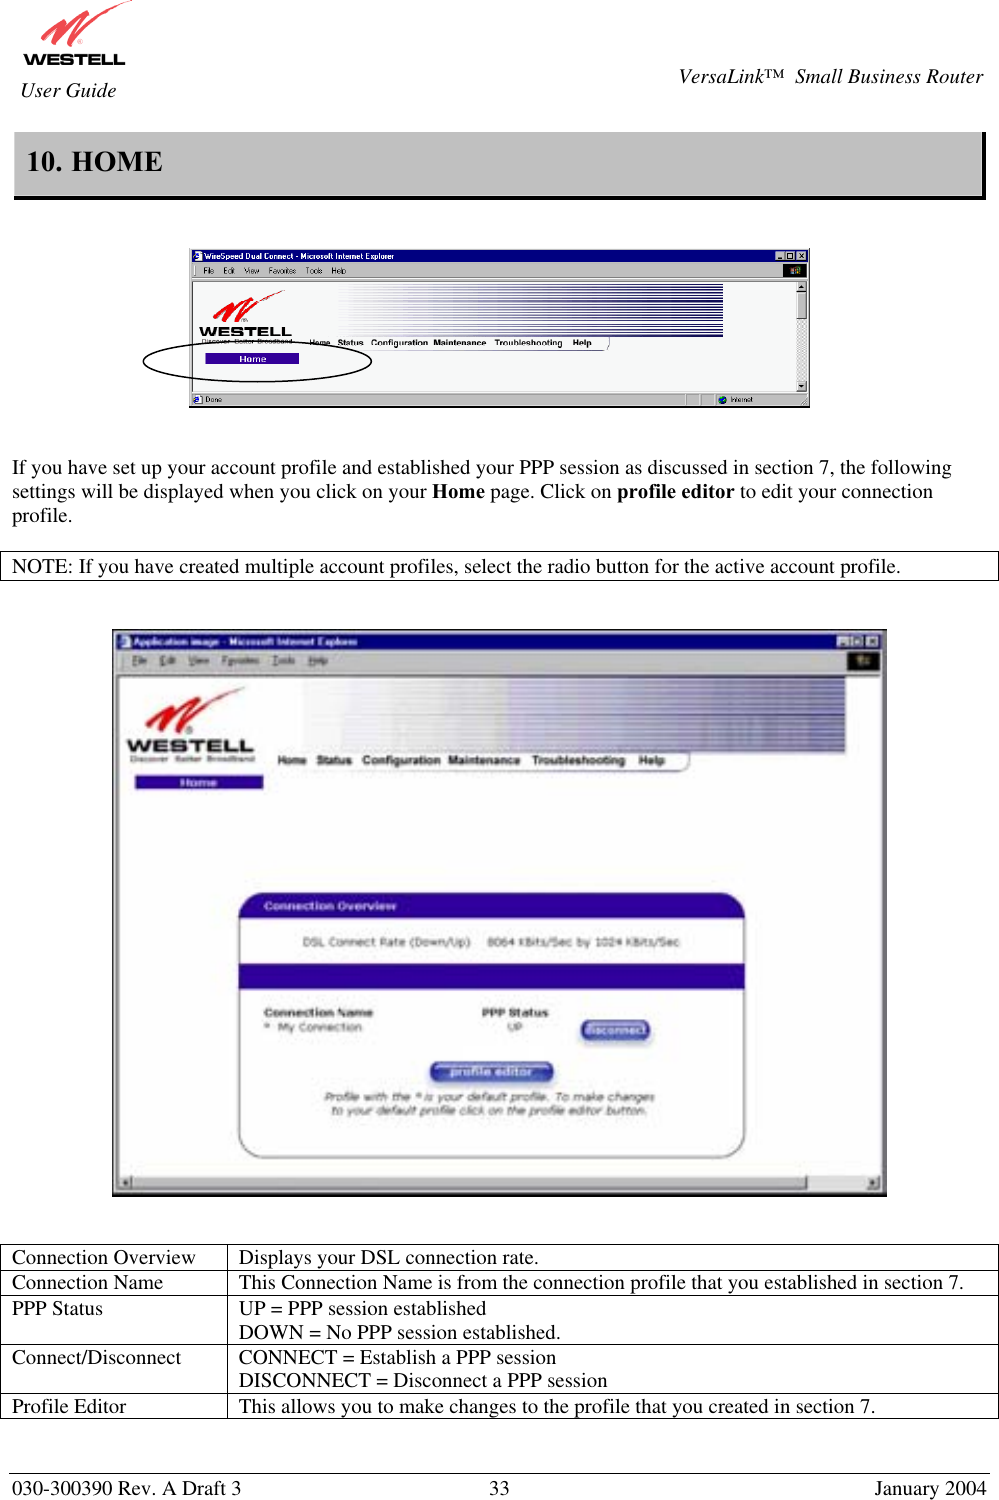       030-300390 Rev. A Draft 3  33  January 2004  VersaLink™  Small Business Router  User Guide 10. HOME       If you have set up your account profile and established your PPP session as discussed in section 7, the following settings will be displayed when you click on your Home page. Click on profile editor to edit your connection profile.  NOTE: If you have created multiple account profiles, select the radio button for the active account profile.      Connection Overview  Displays your DSL connection rate.  Connection Name   This Connection Name is from the connection profile that you established in section 7. PPP Status  UP = PPP session established DOWN = No PPP session established. Connect/Disconnect   CONNECT = Establish a PPP session DISCONNECT = Disconnect a PPP session Profile Editor  This allows you to make changes to the profile that you created in section 7.  